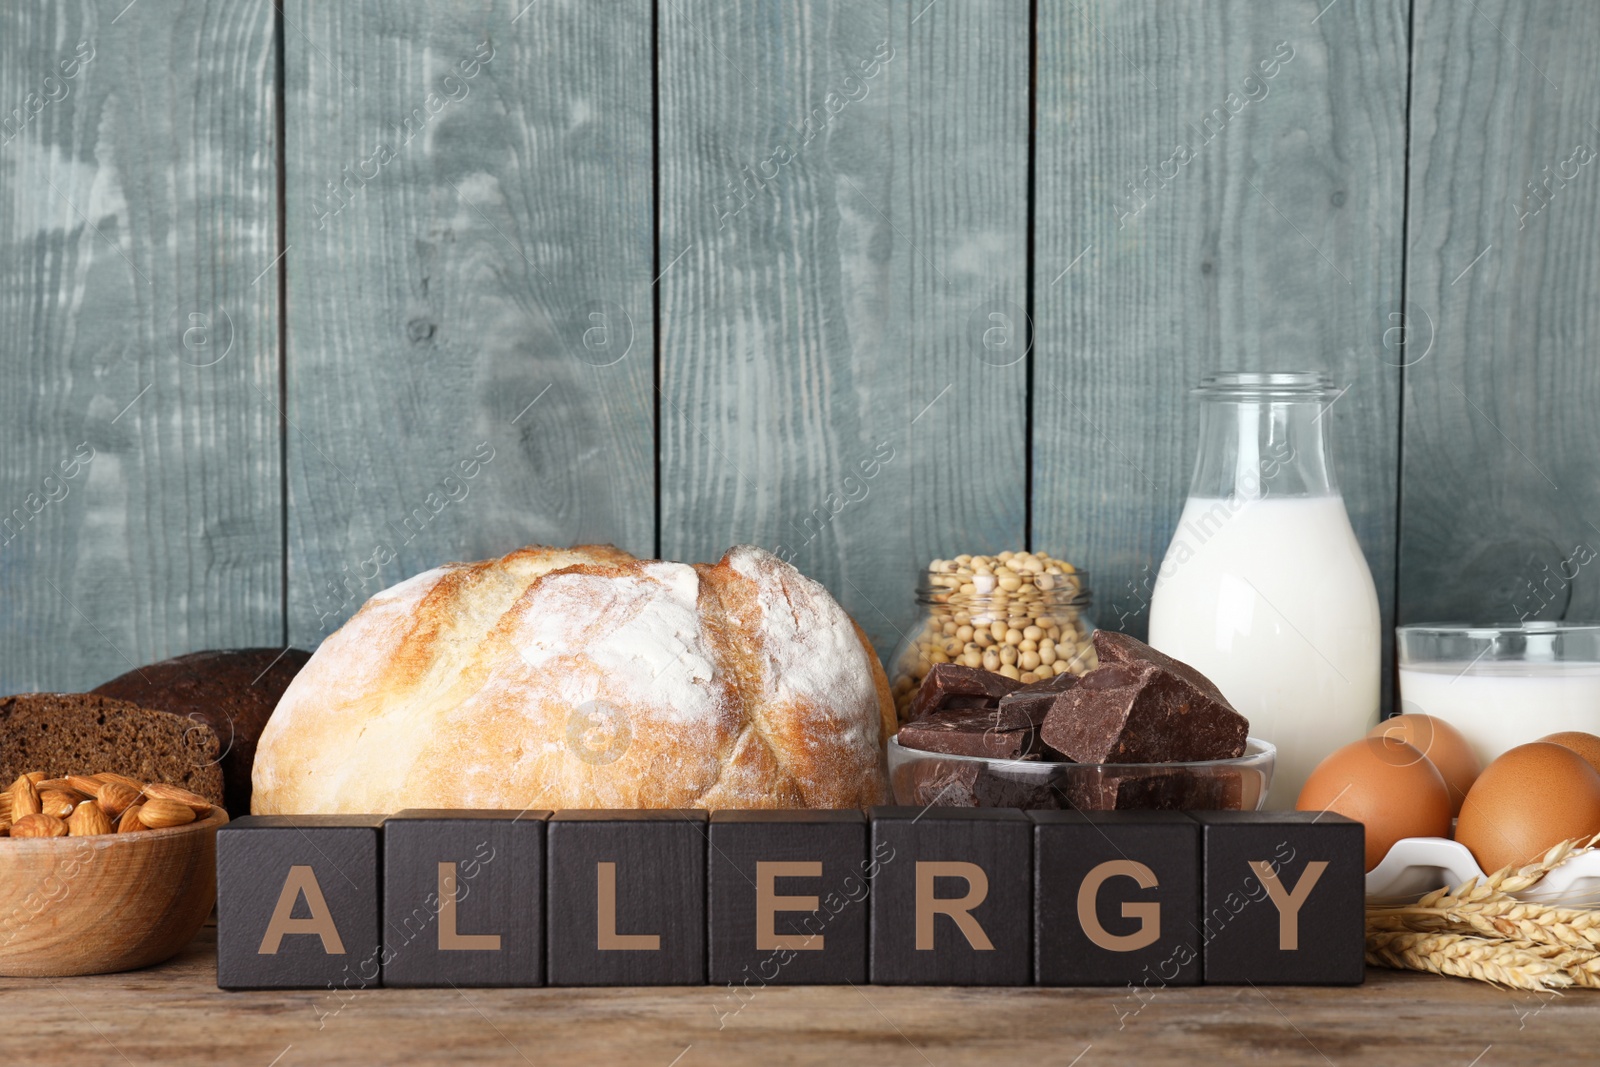 Photo of Different products on wooden background. Food allergy concept